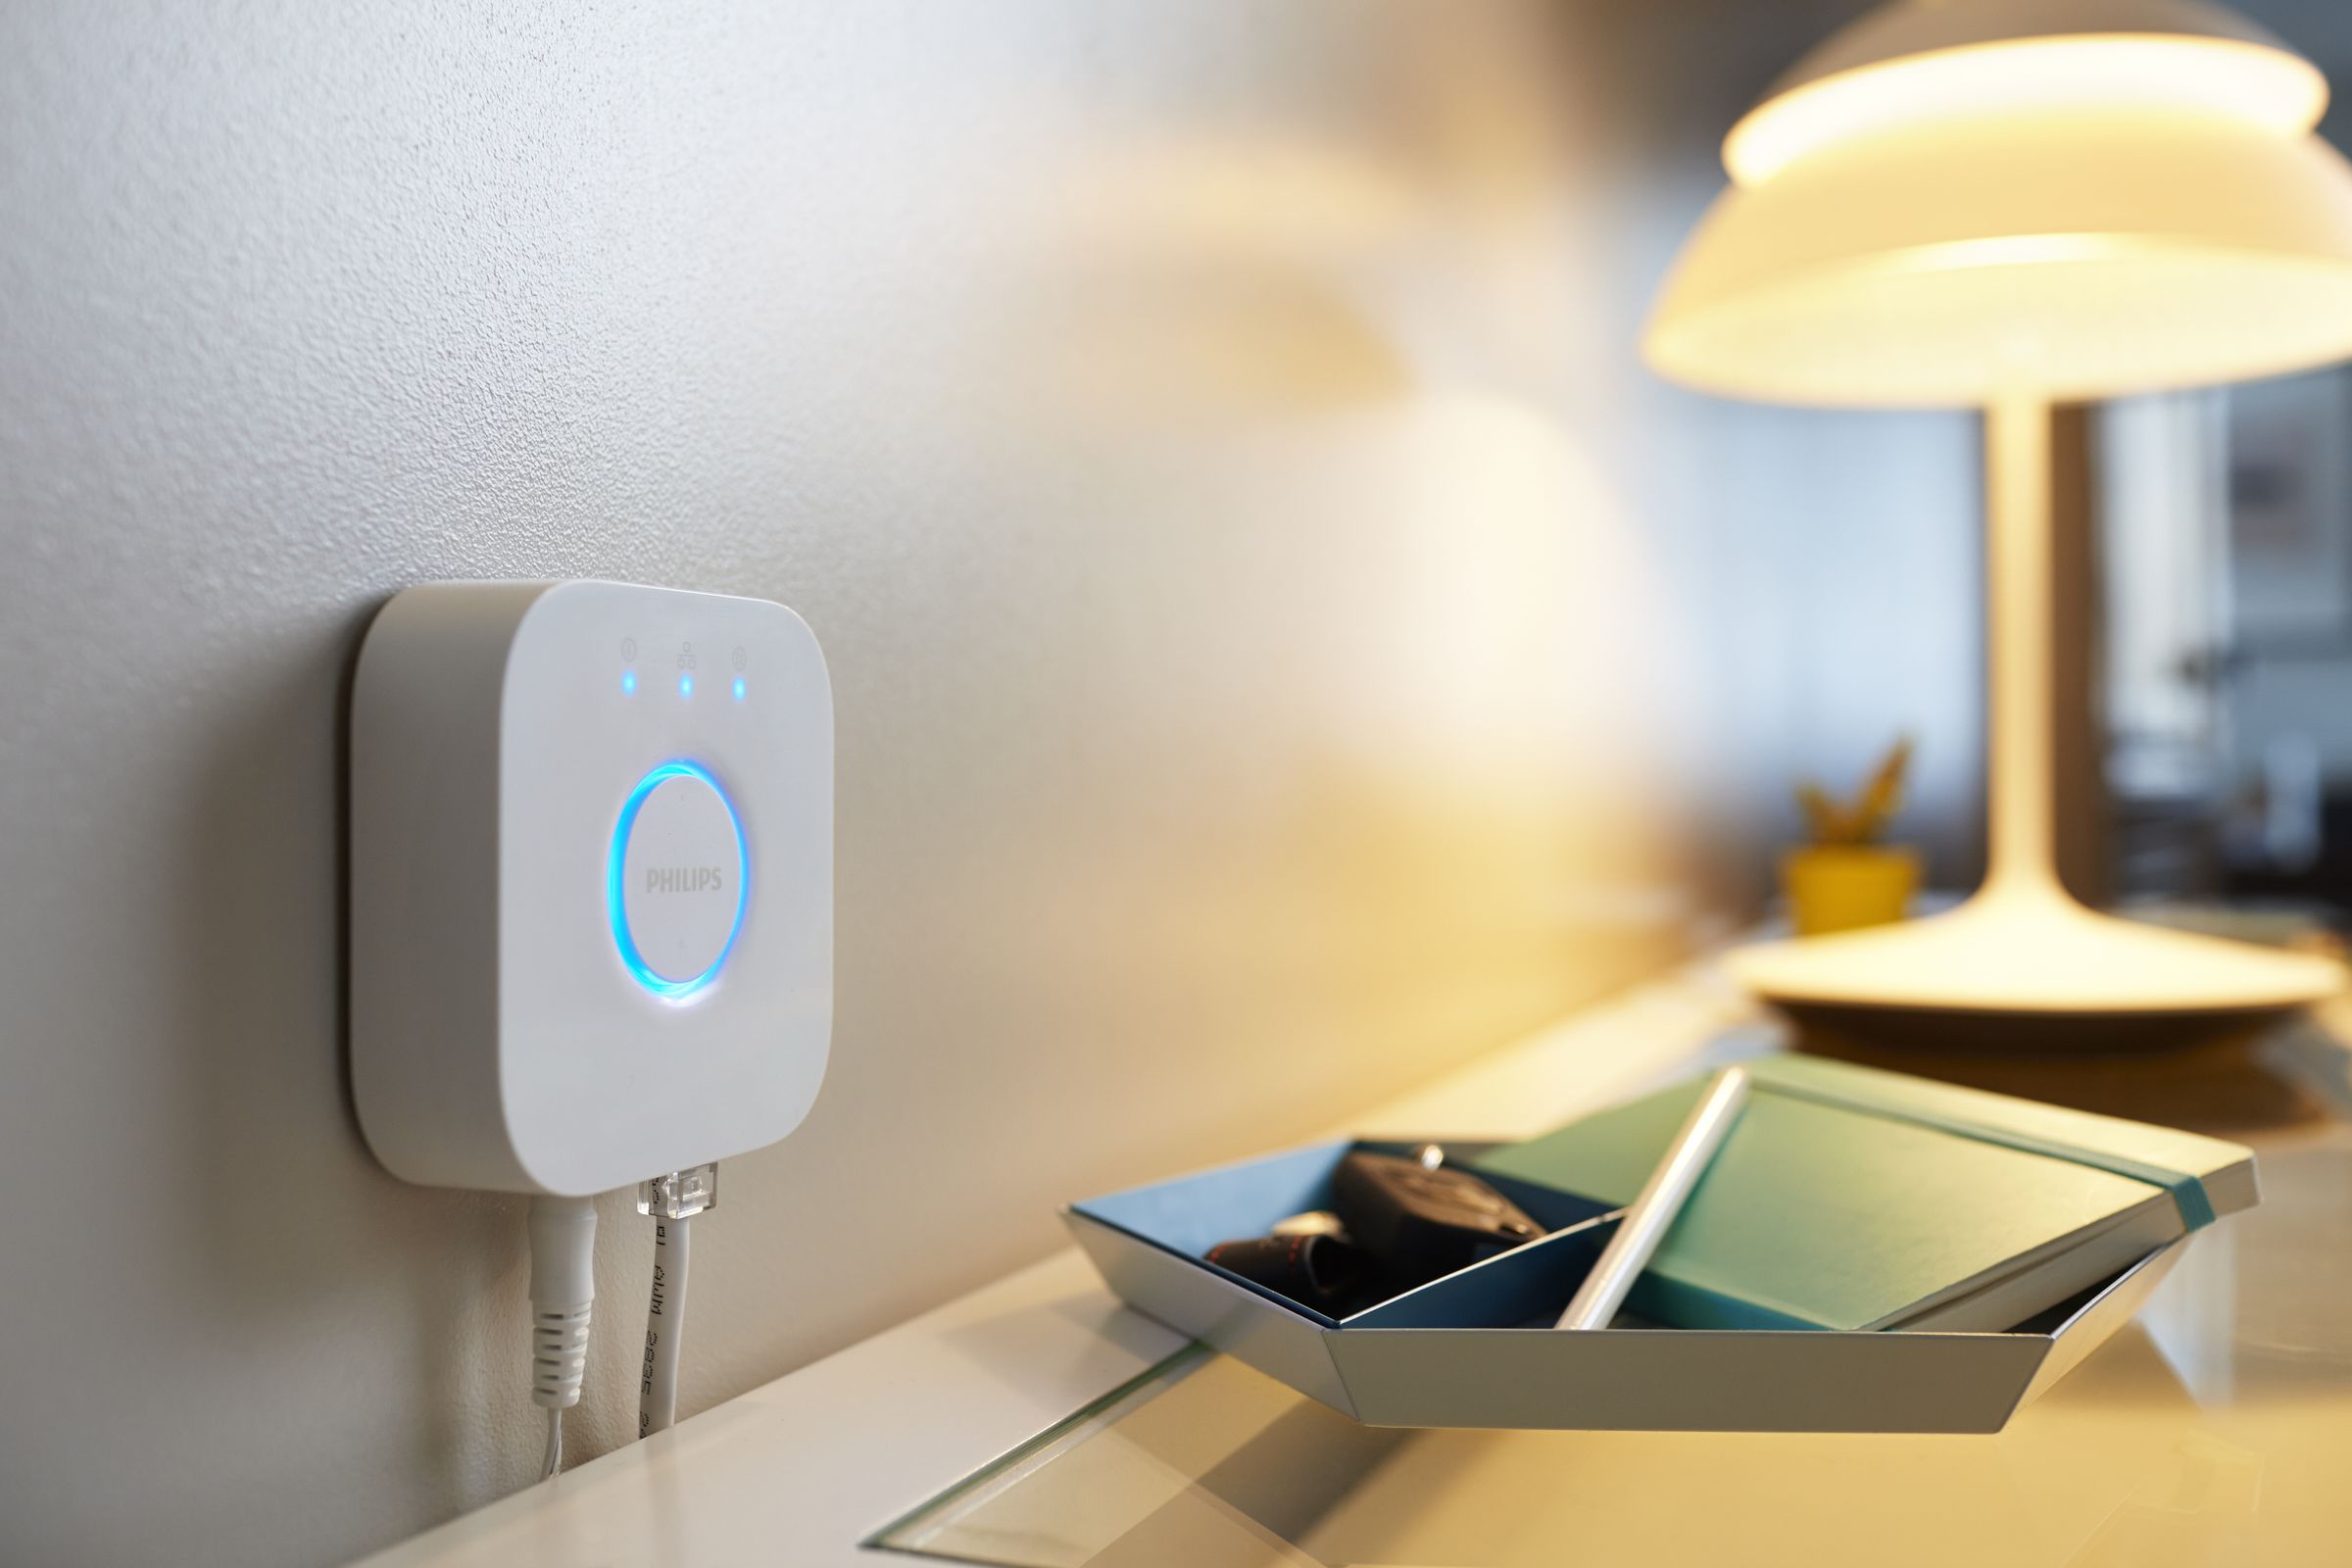 Philips Hue Bridge device shown wall-mounted above a table near a lamp.